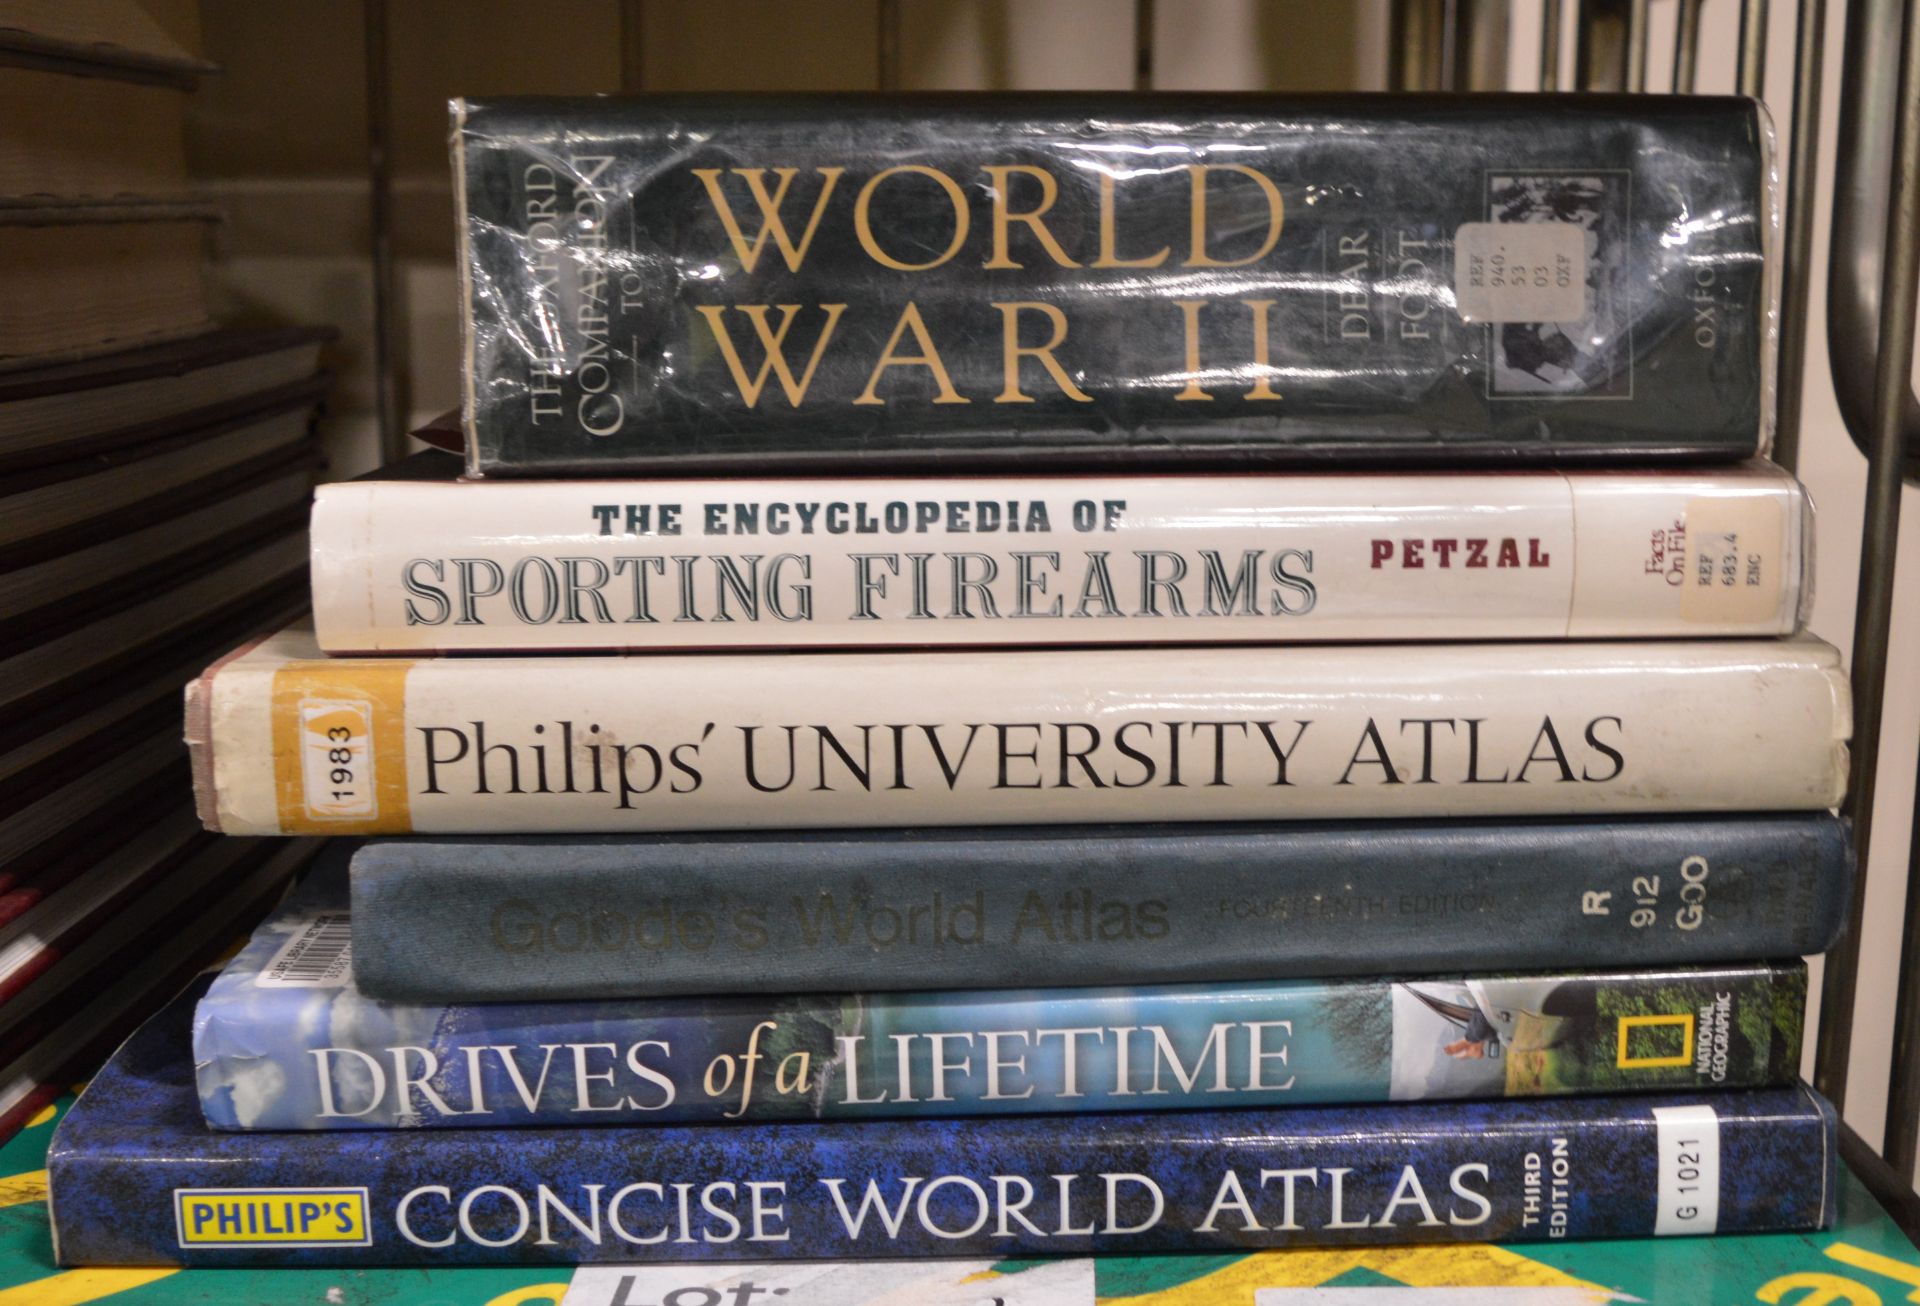 Books - Atlases, Encyclopedias, Drives of a lifetime, Sporting Firearms - Image 3 of 3